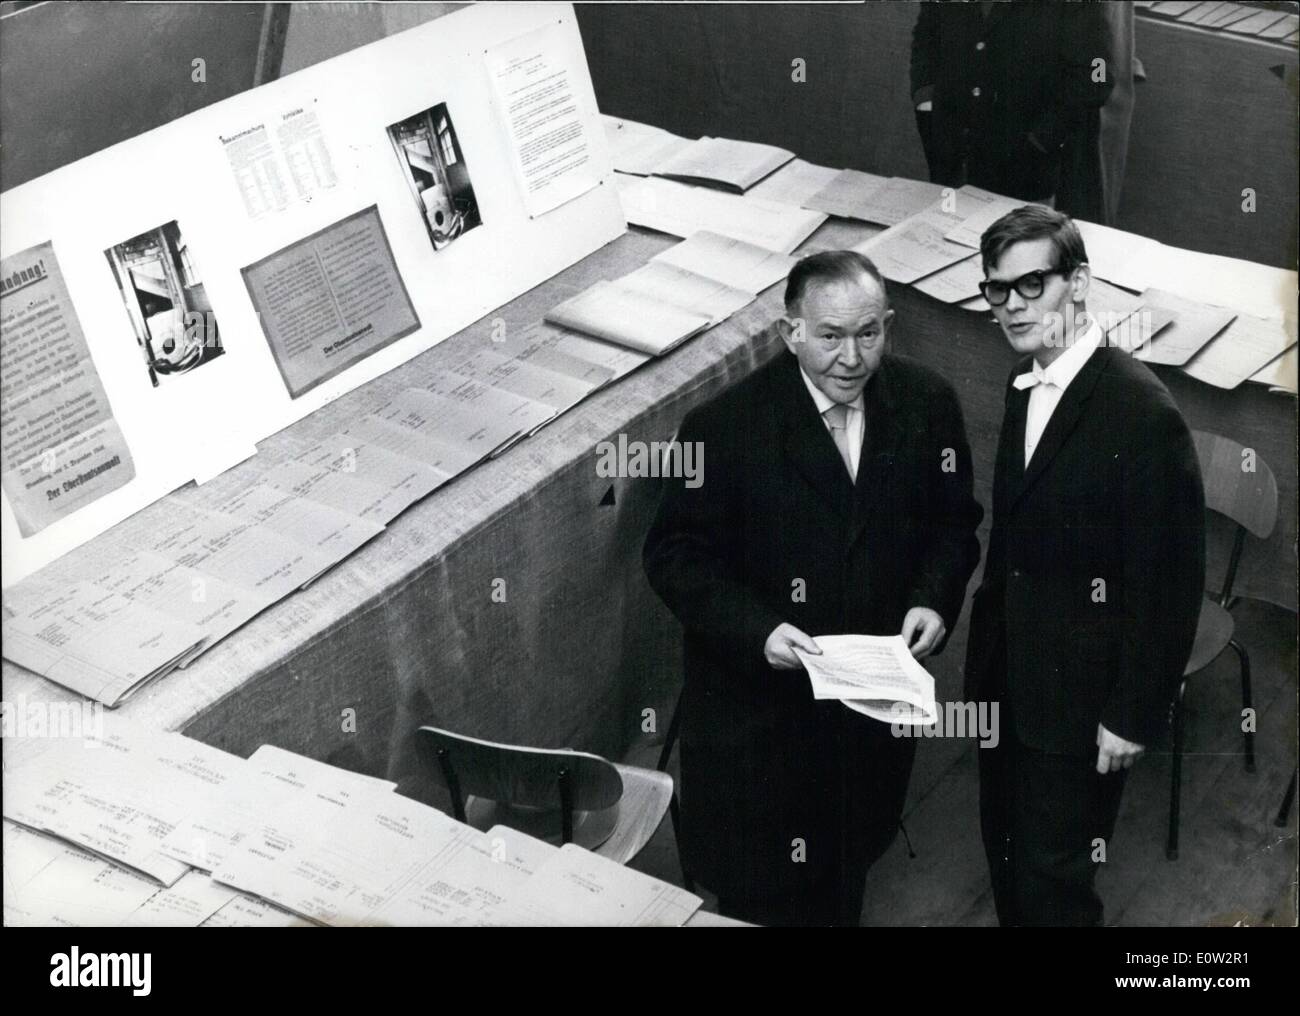 Feb. 02, 1961 - Crown-Witness in Eichmann trial visited document exhibition in Munich: The Centre of Political Students' groups Stock Photo